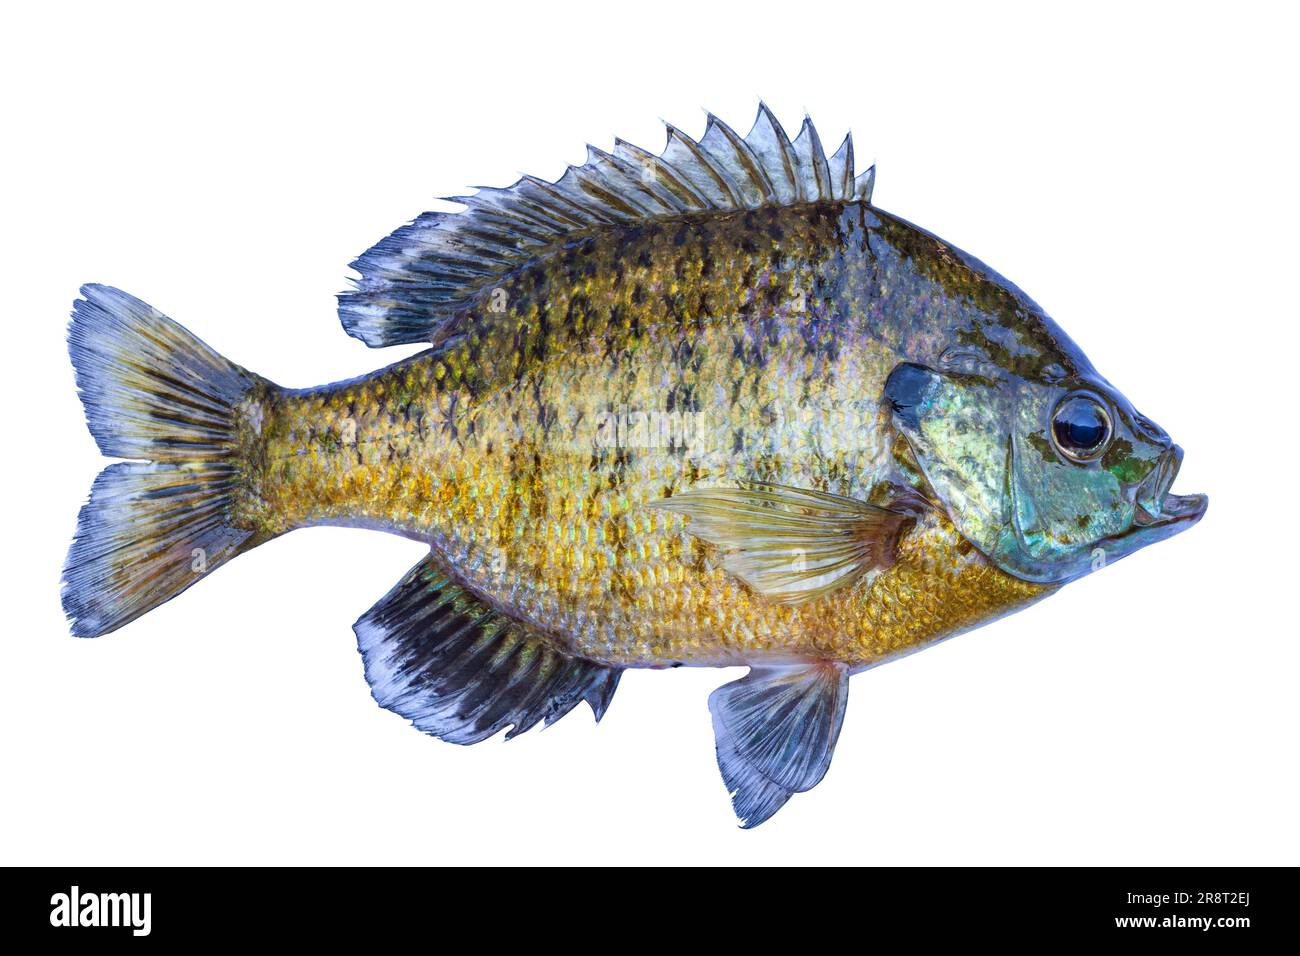 Fresh caught bluegill sunfish from a northern Minnesota lake isolated on a white background Stock Photo